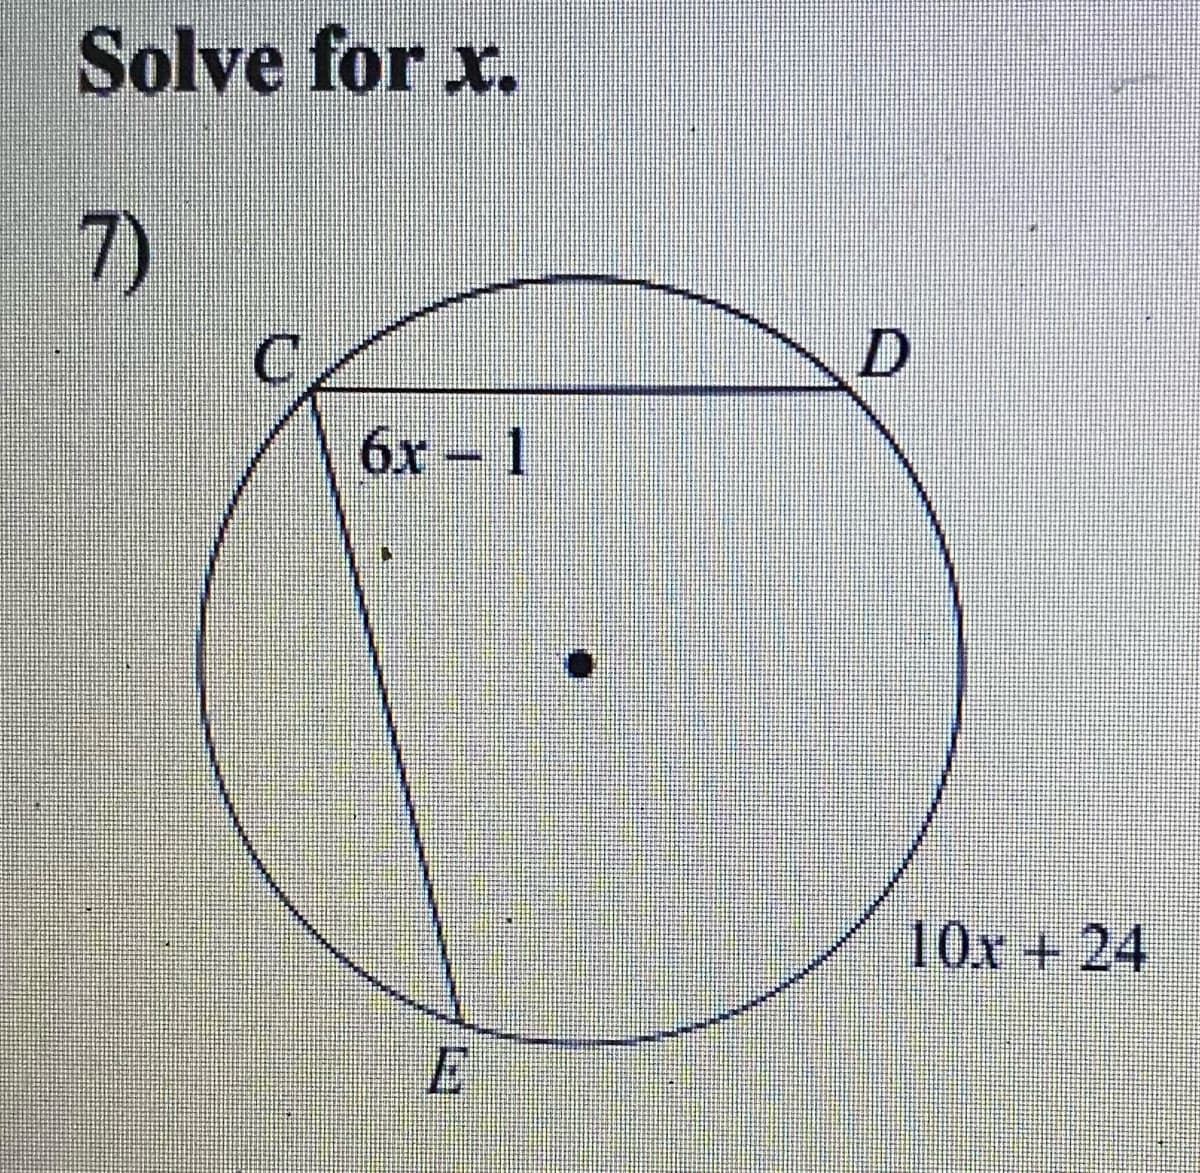 Solve for x.
7)
бх — 1
10x +24
